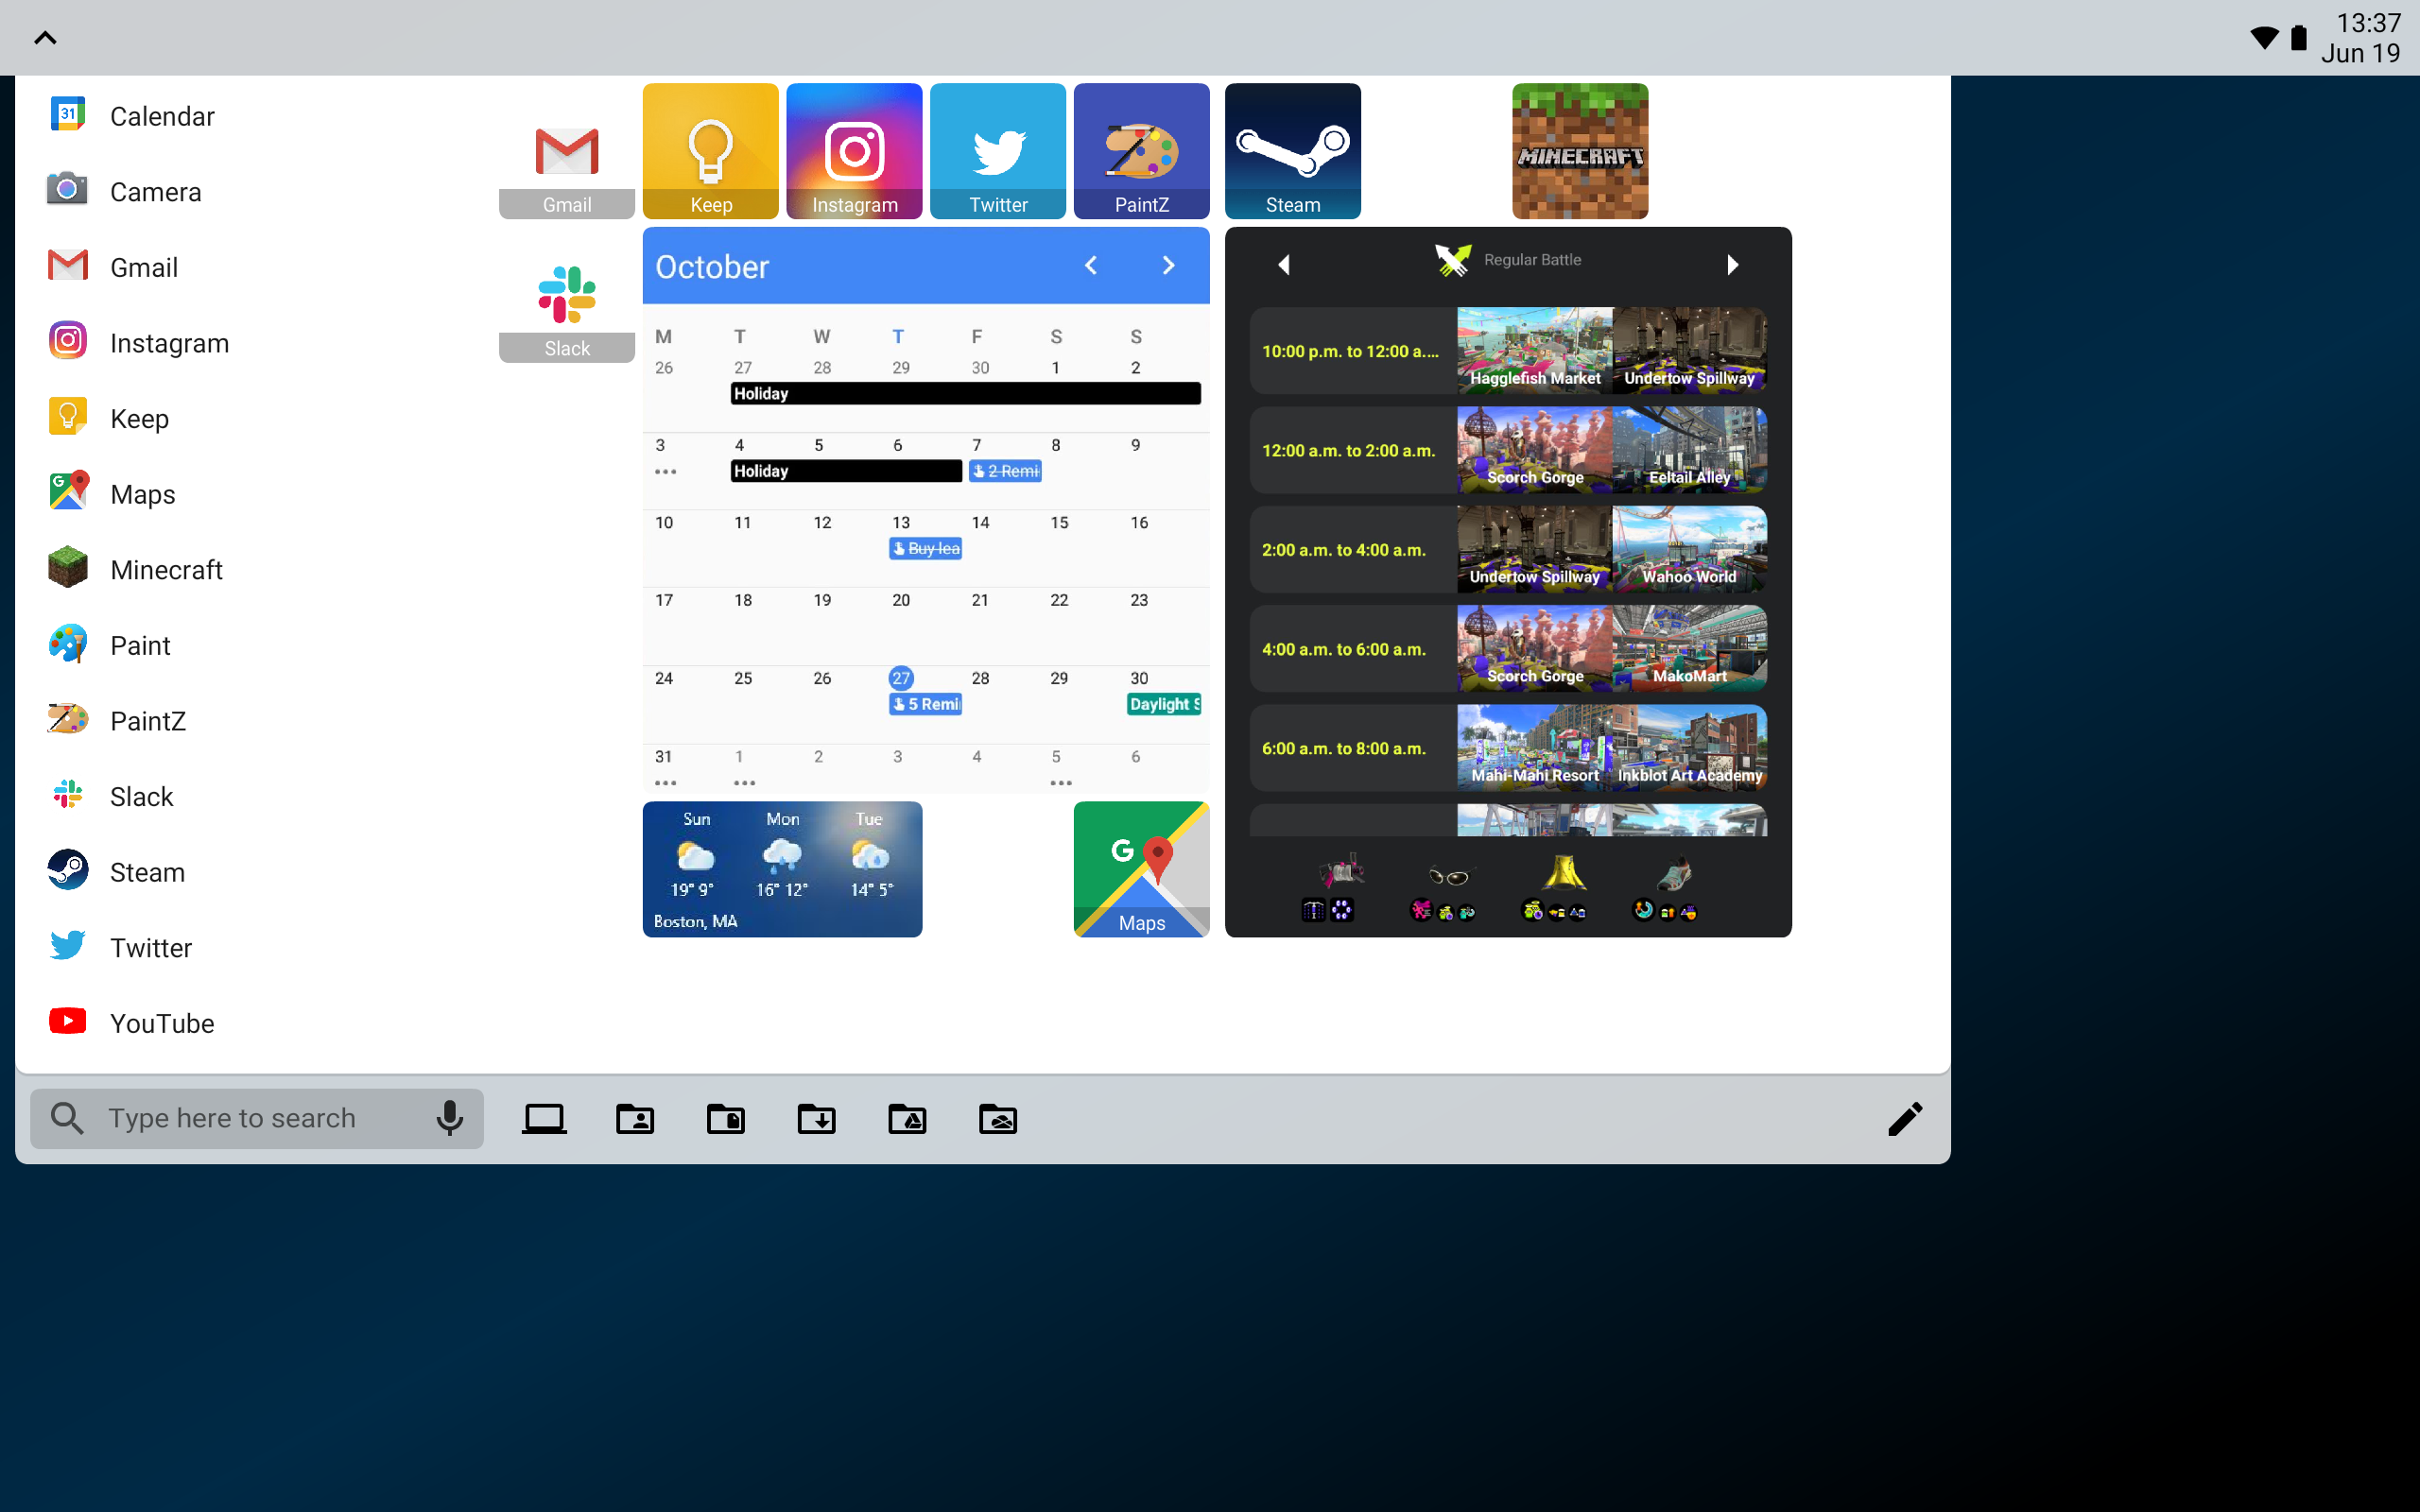 On a large screen, the launcher shows multiple blocks of shortcuts.